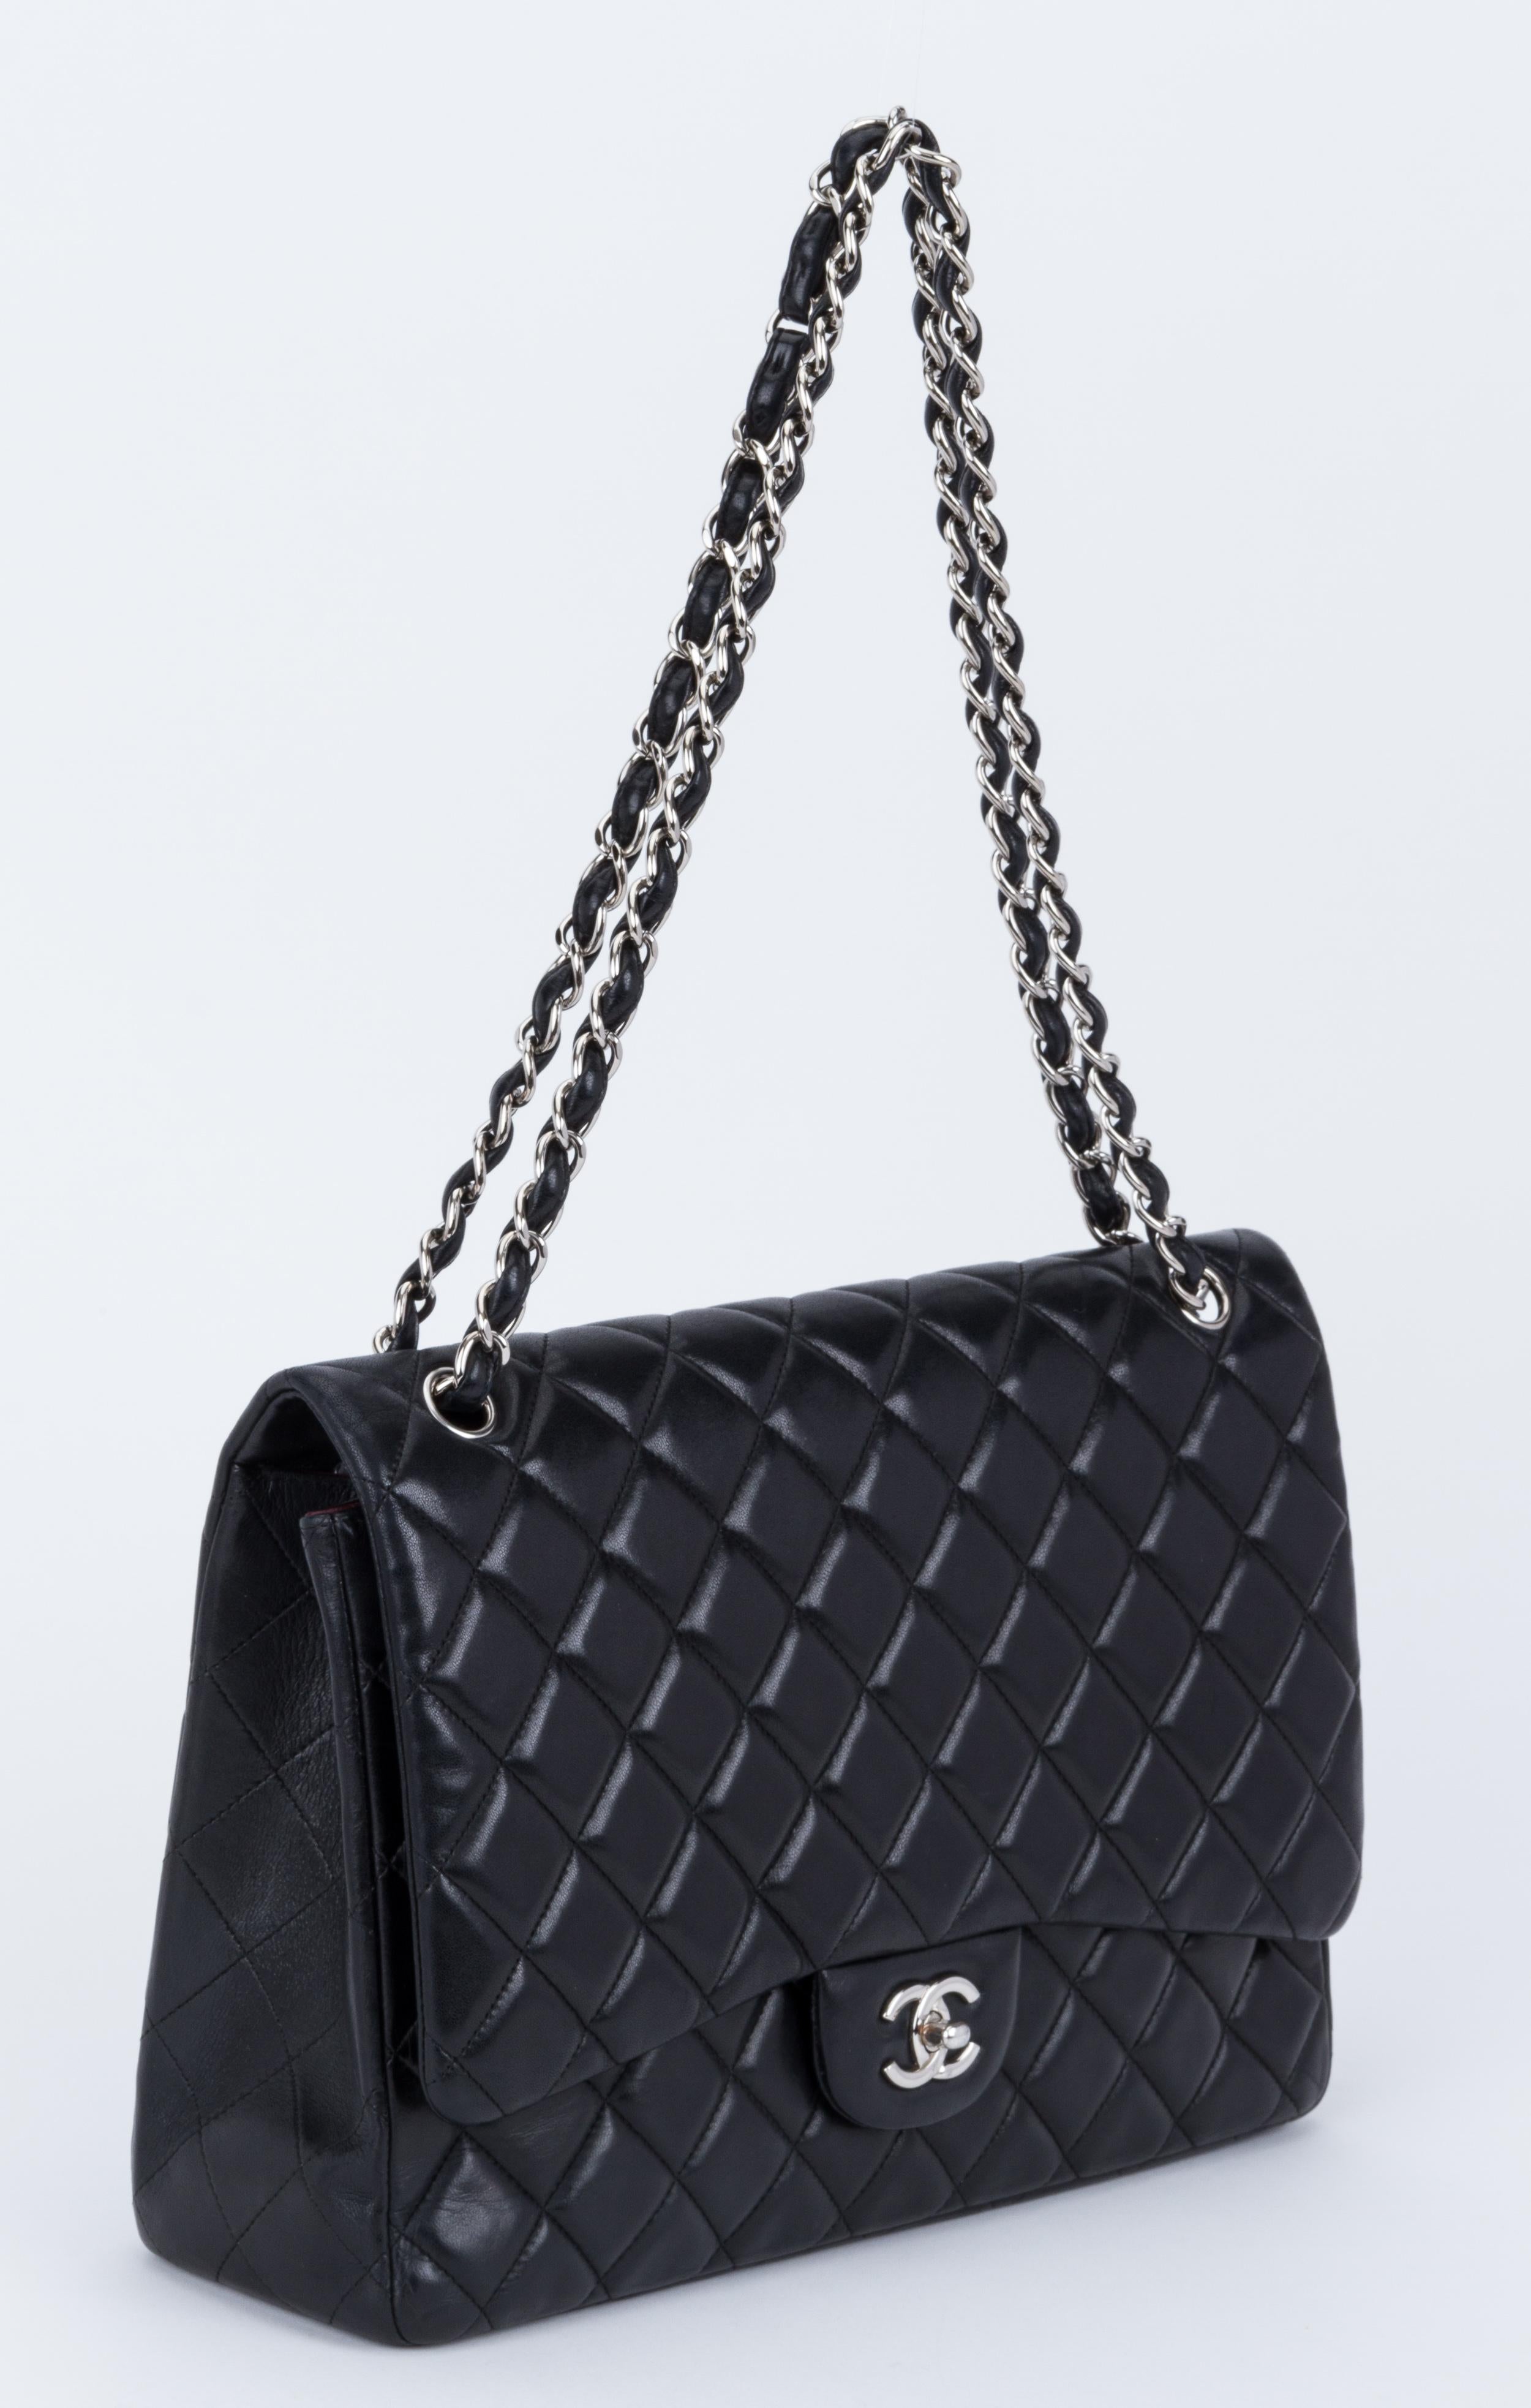 Chanel black quilted lambskin maxi single flap with silver tone hardware. Shoulder drop 11